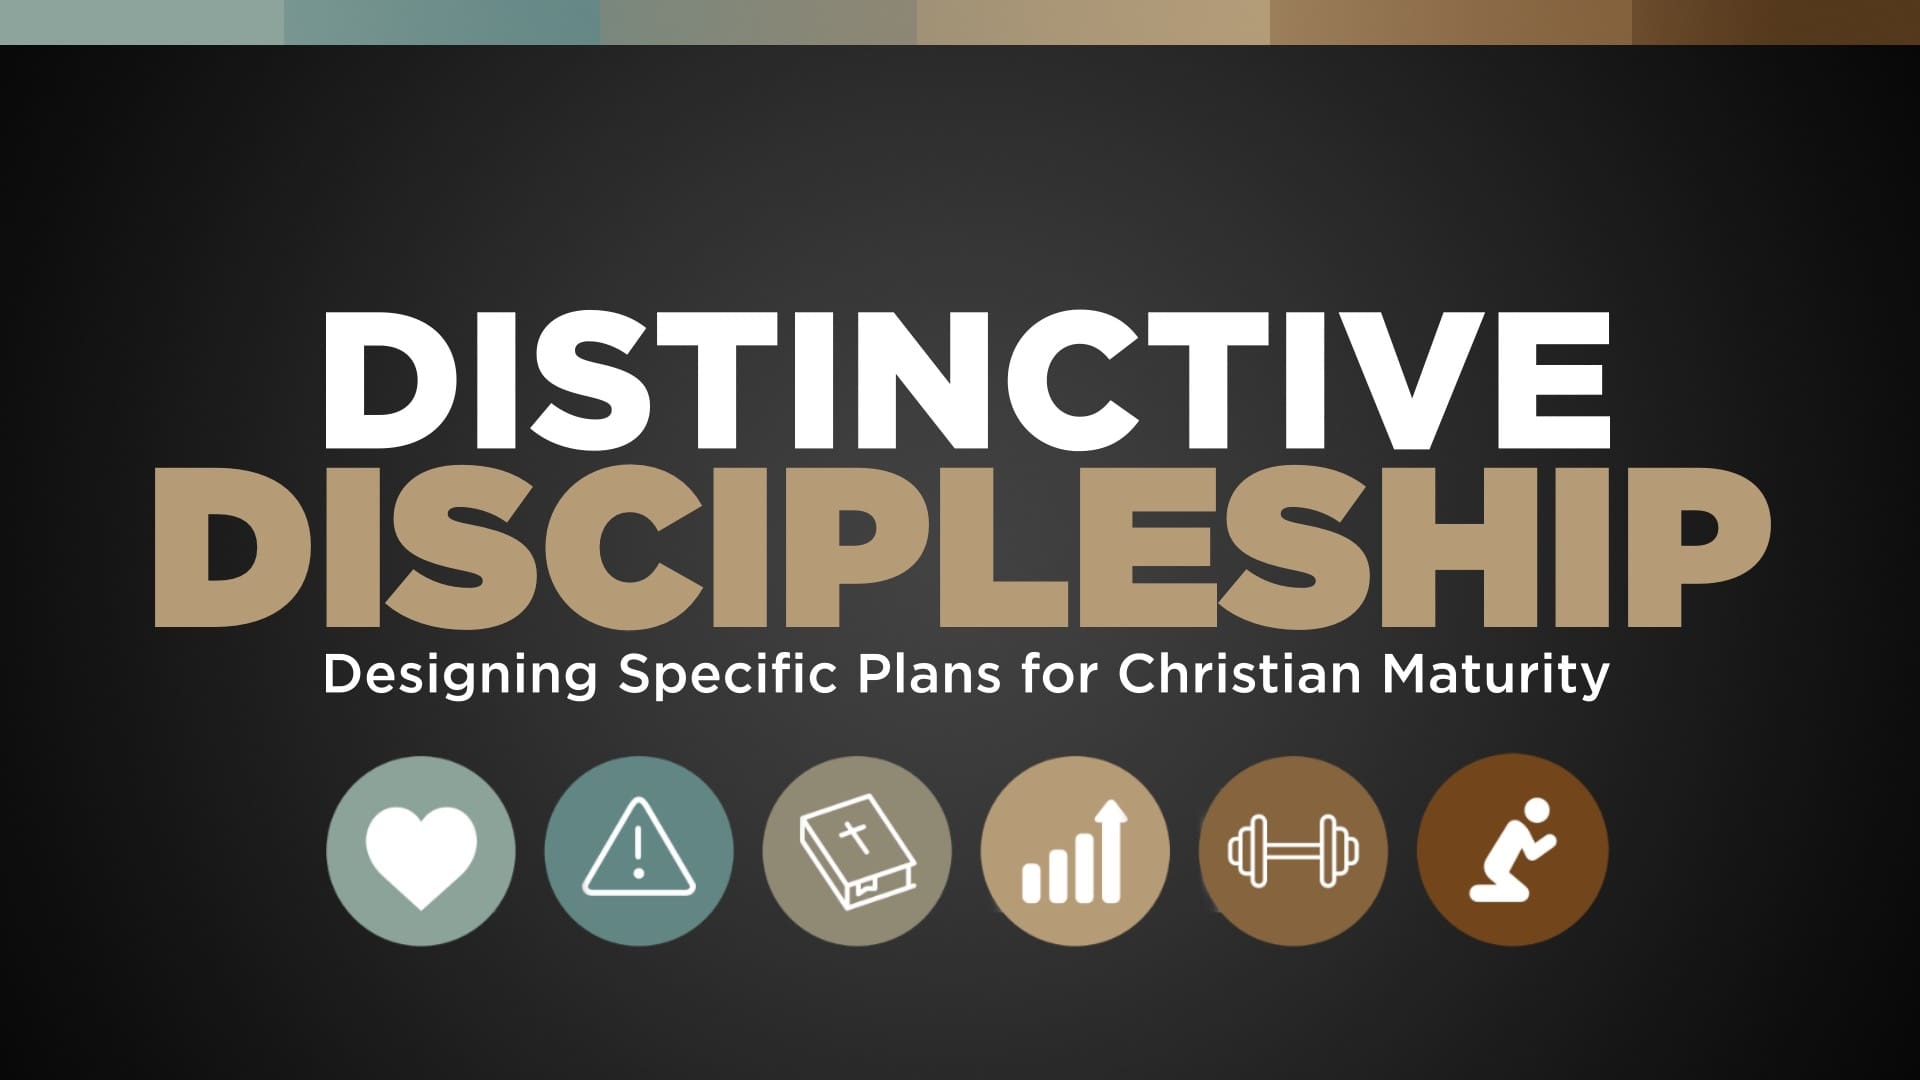 Category Examples for Distinctive Discipleship Plans